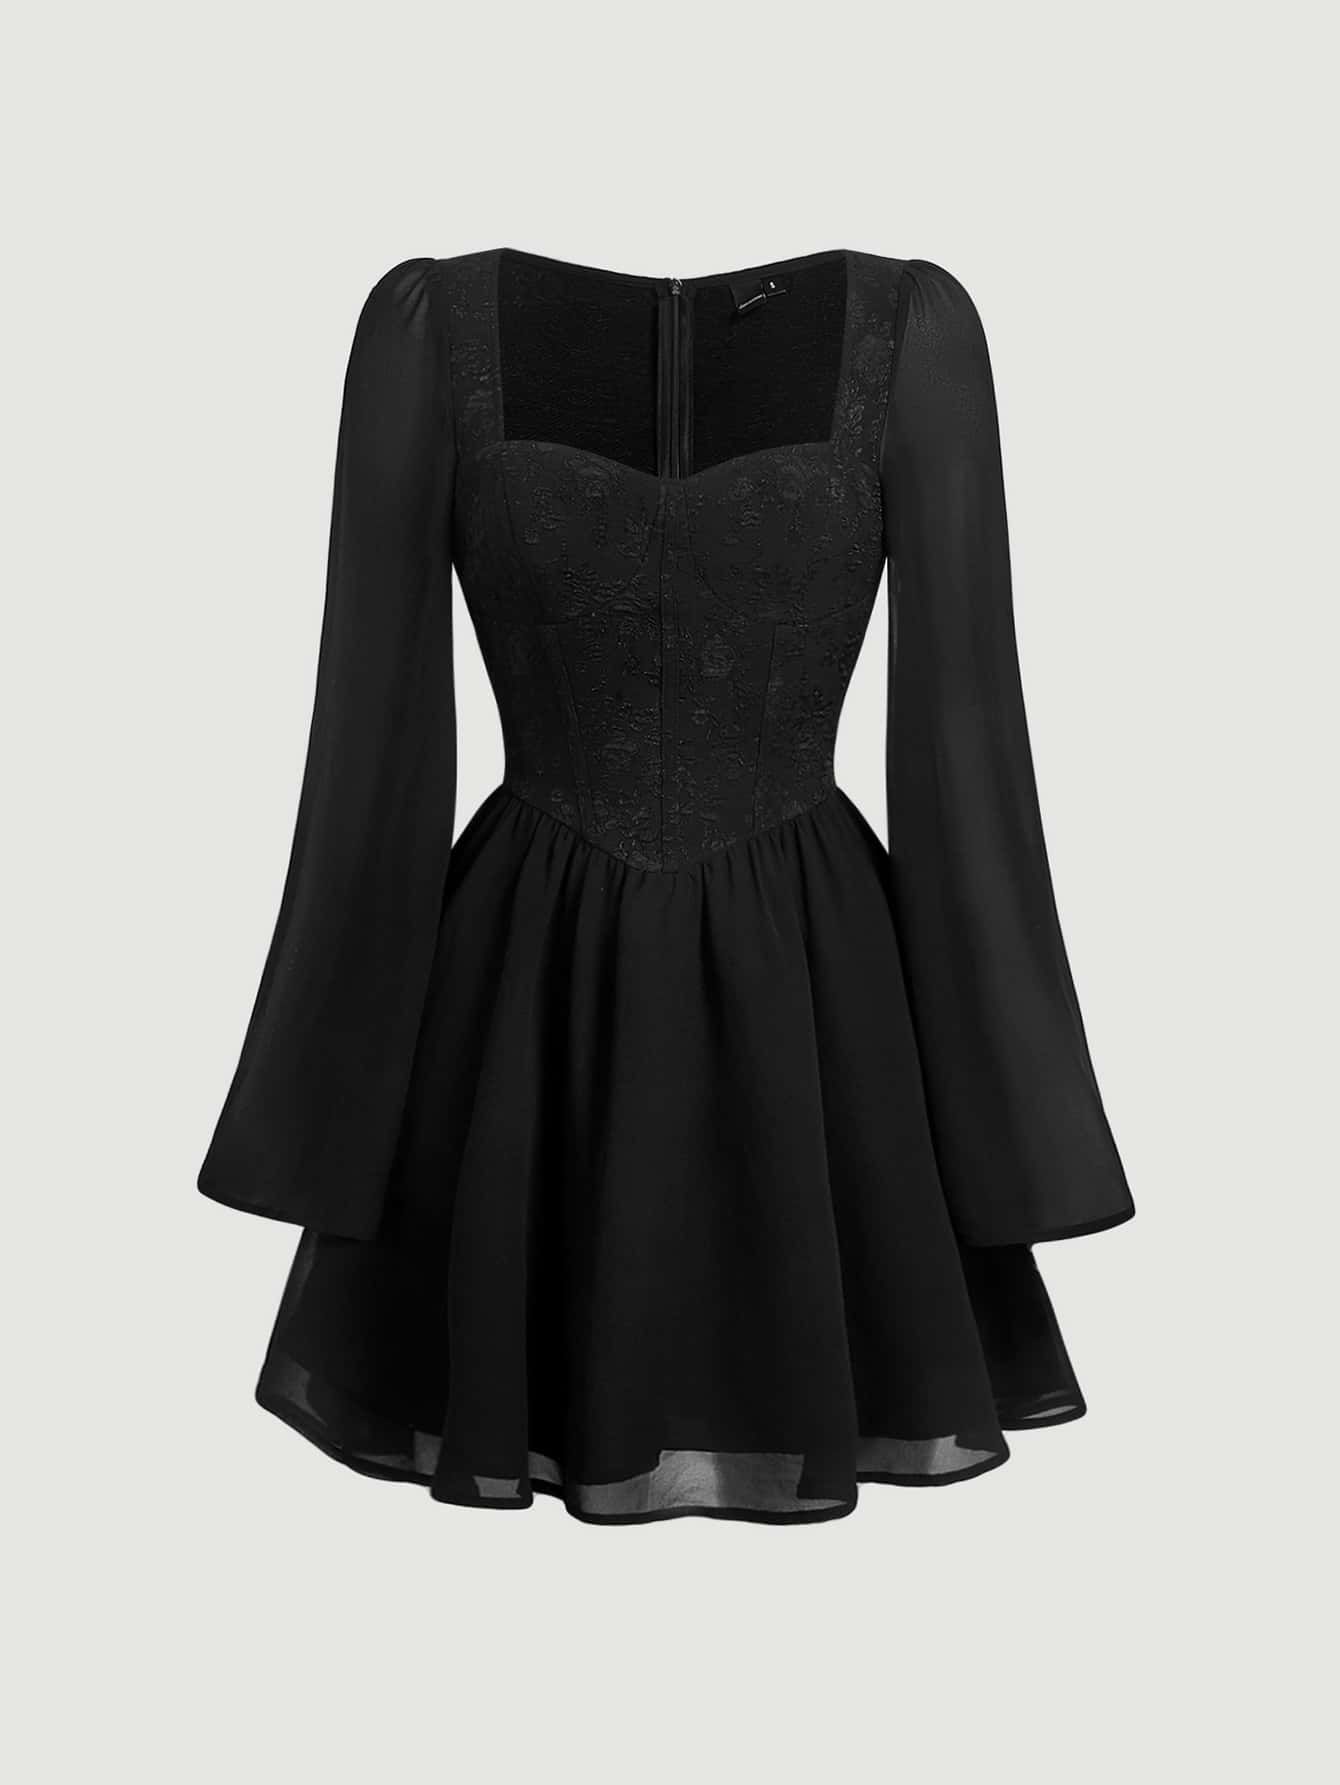 How to Wear Black Collared Dress: Top 13 Artistic Outfit Ideas for Women